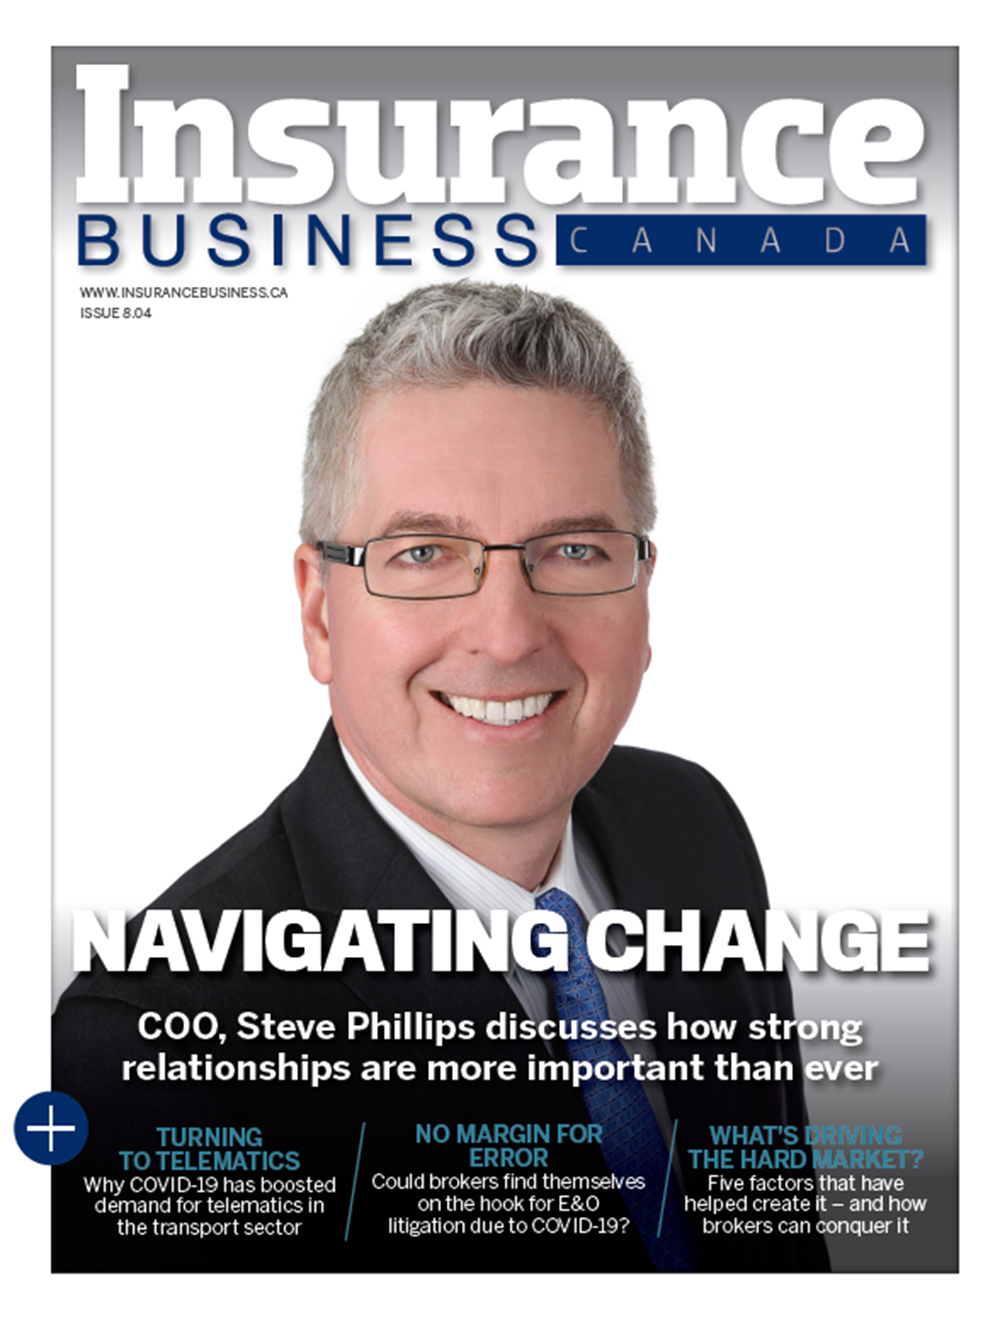 Cover page of Insurance Business Canada Magazine with photo of Steve Phillips, COO of Sovereign Insurance